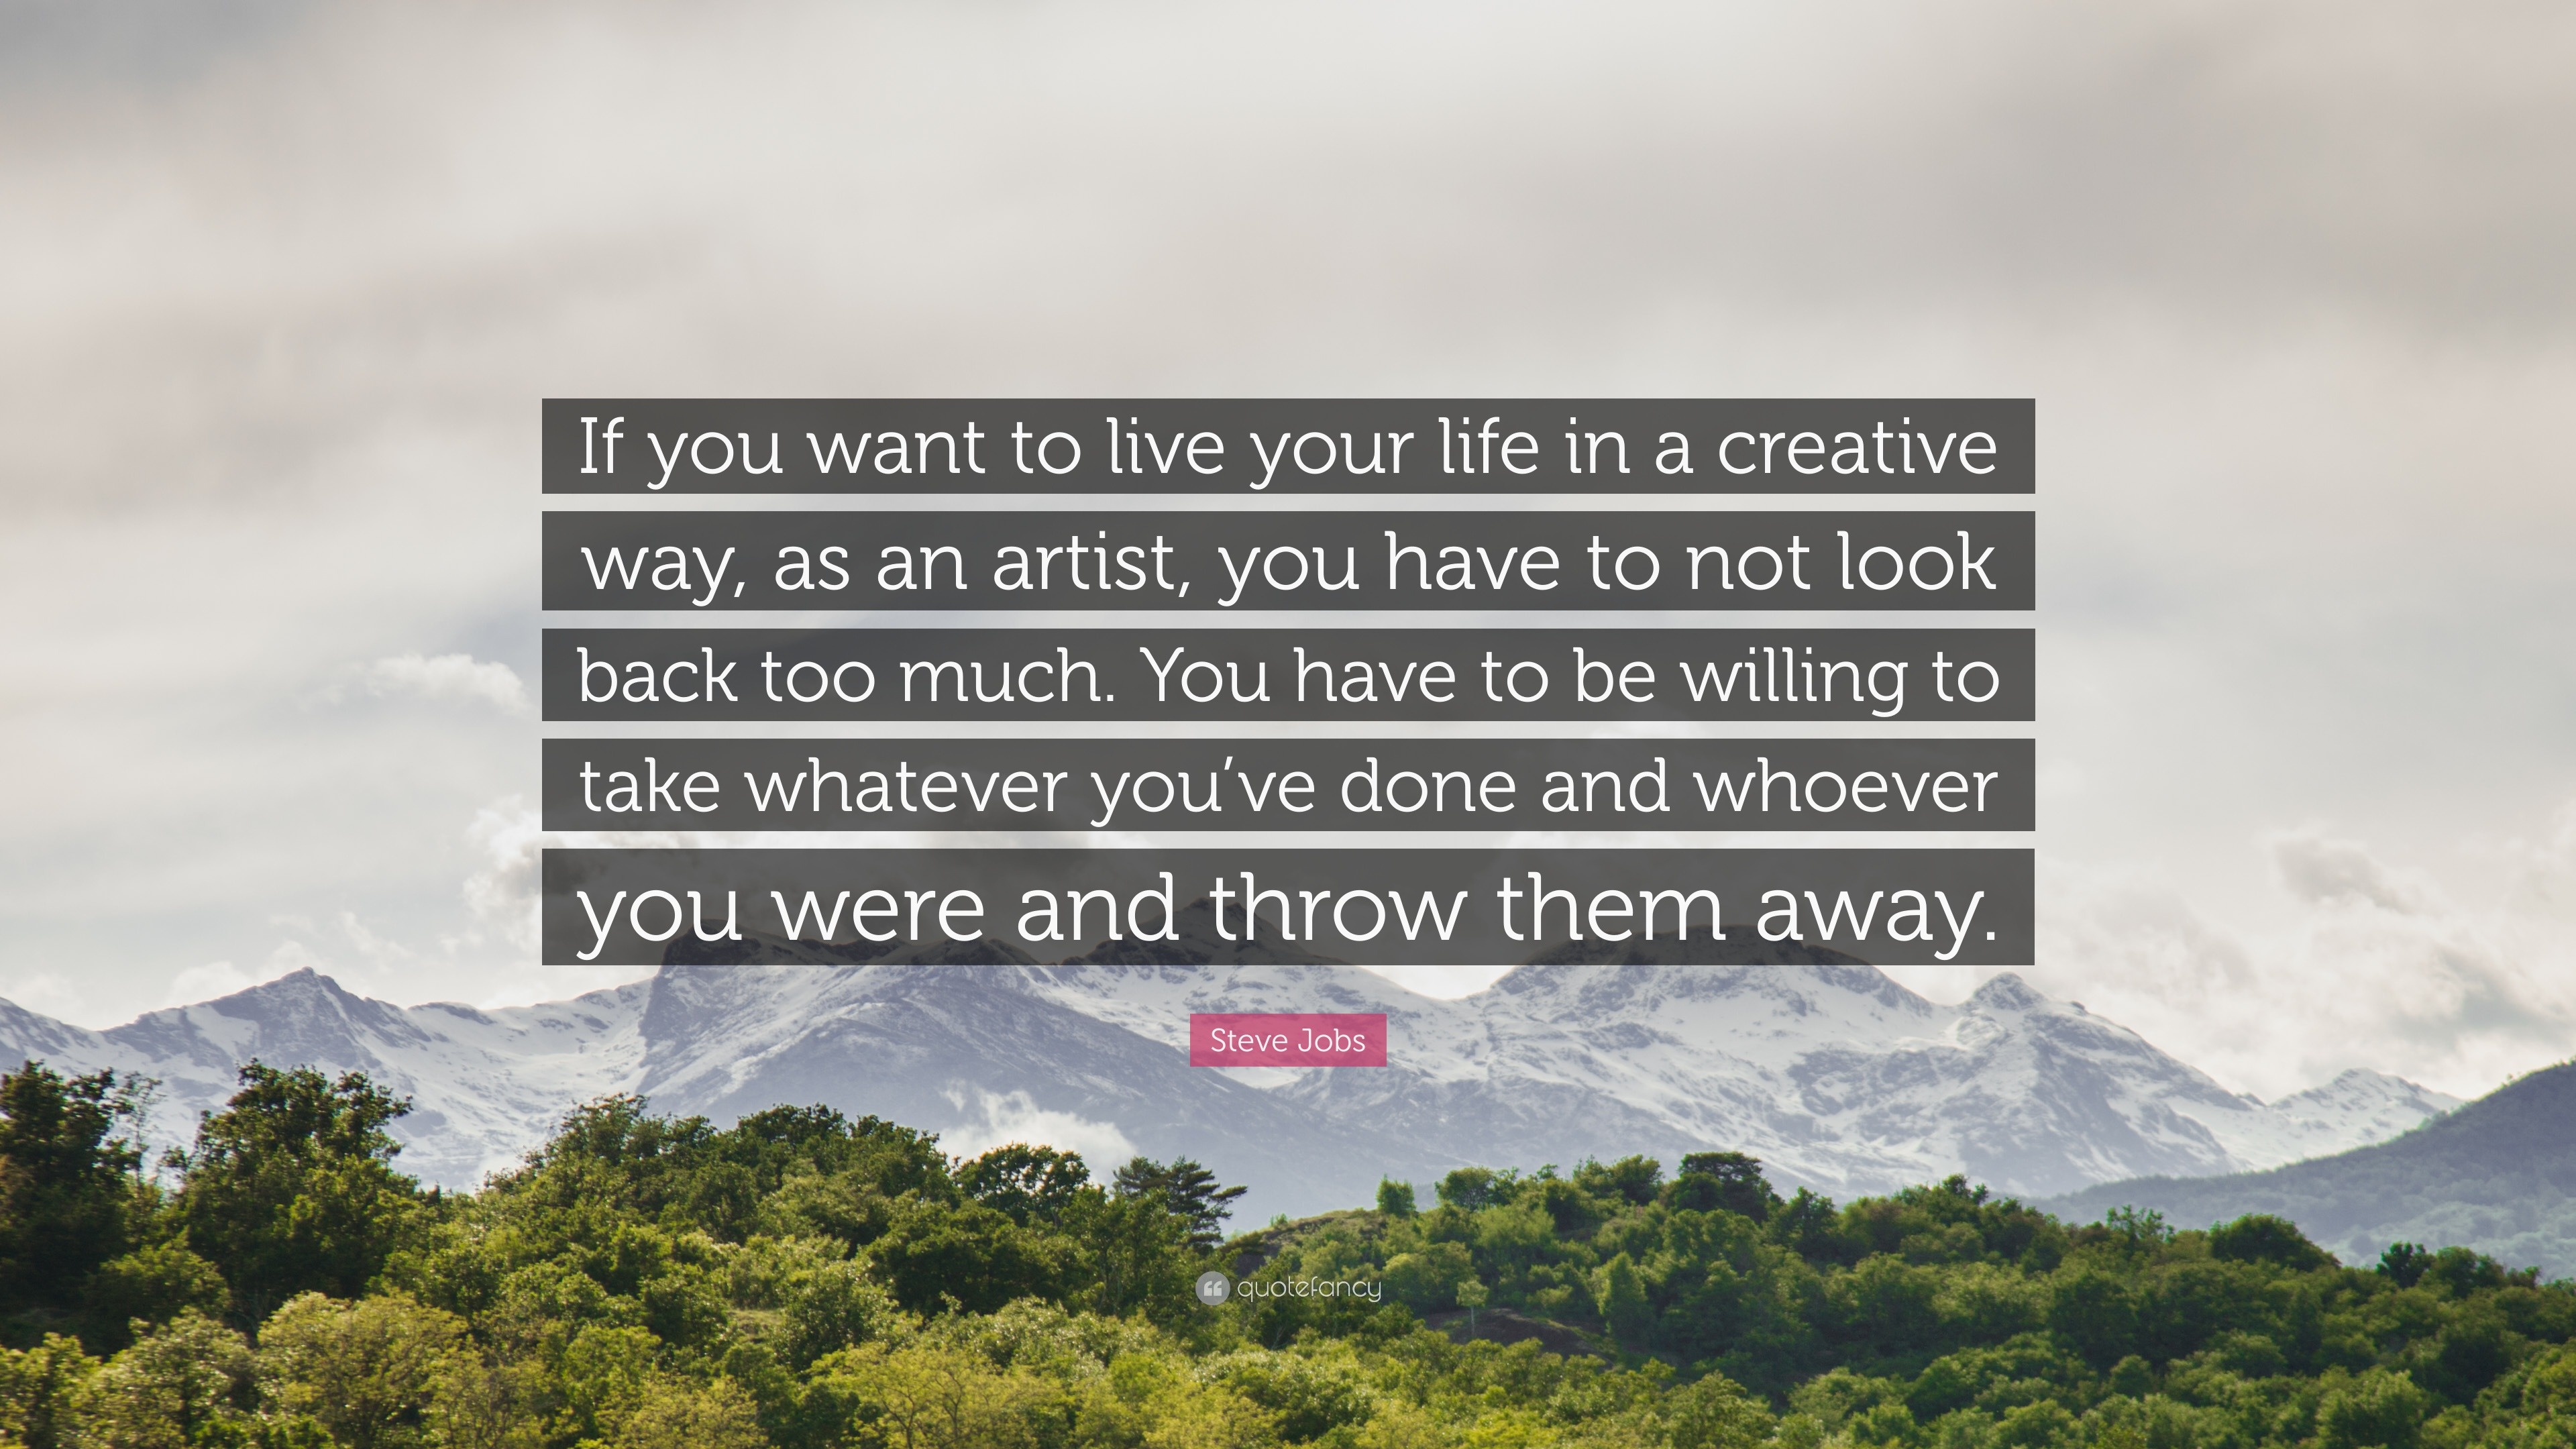 Steve Jobs Quote “If you want to live your life in a creative way